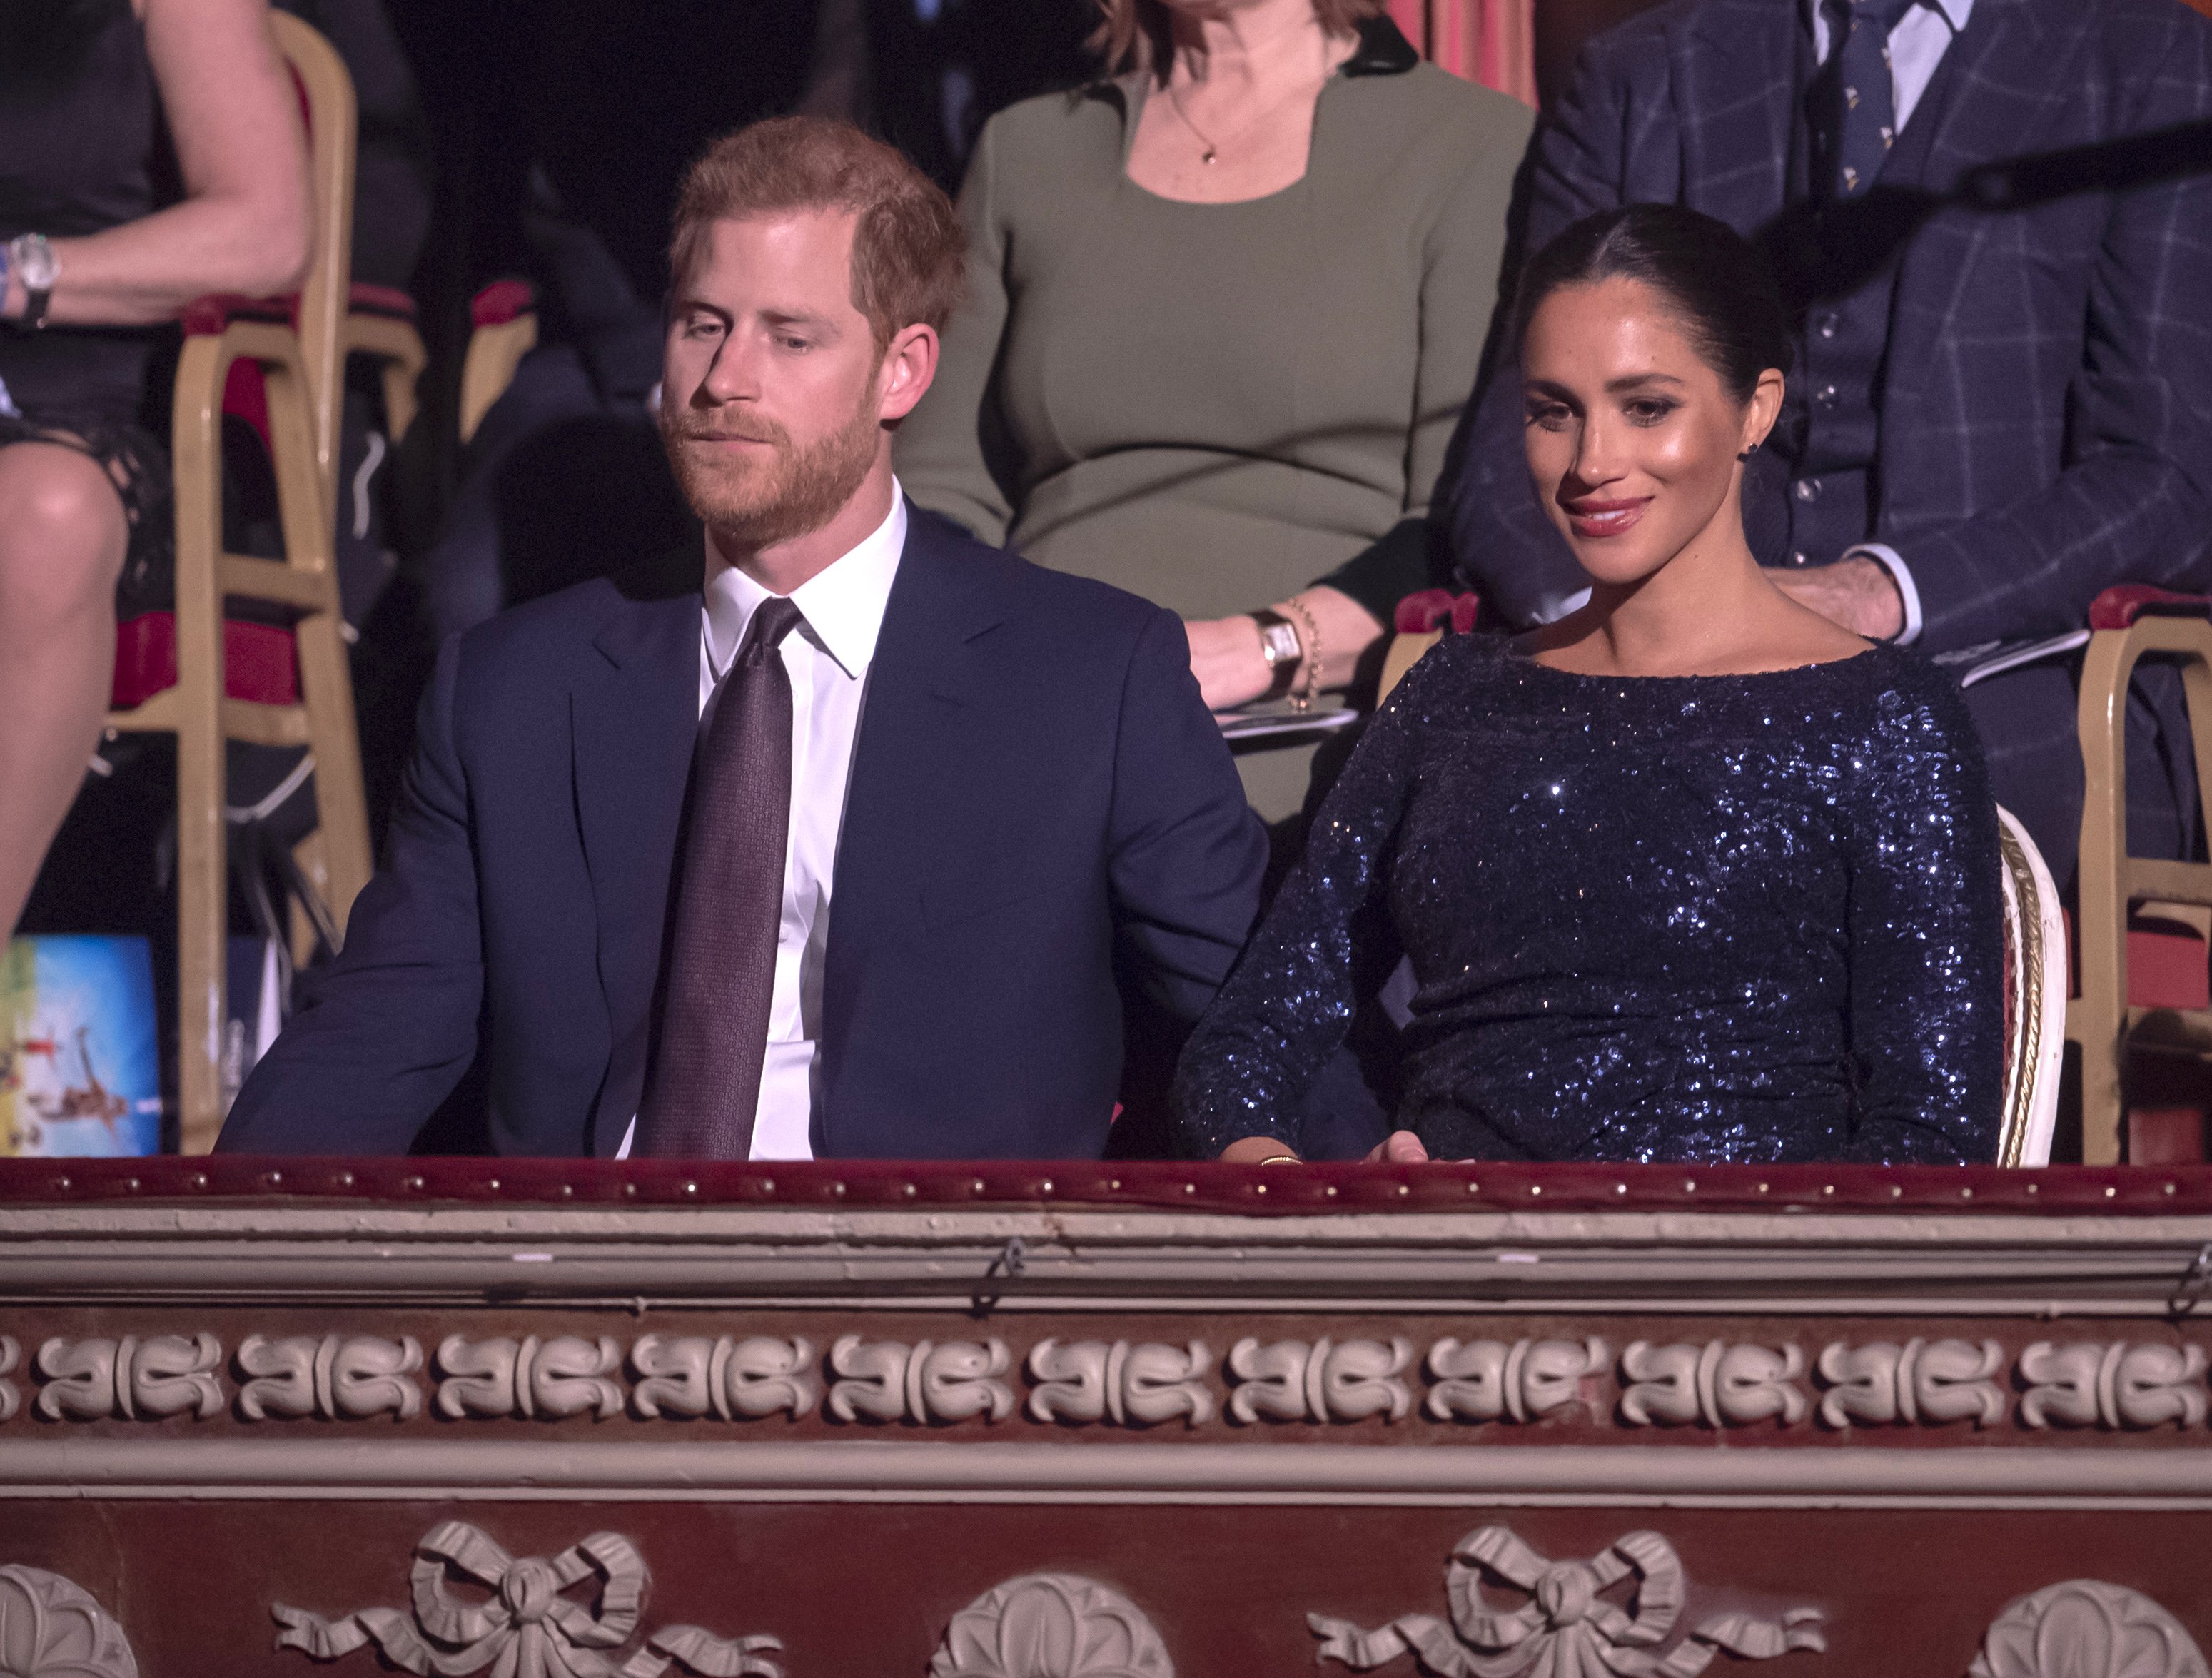 Prince Harry and Meghan Markle at Royal Albert Hall on January 16, 2019 in London England | Source: Getty Images